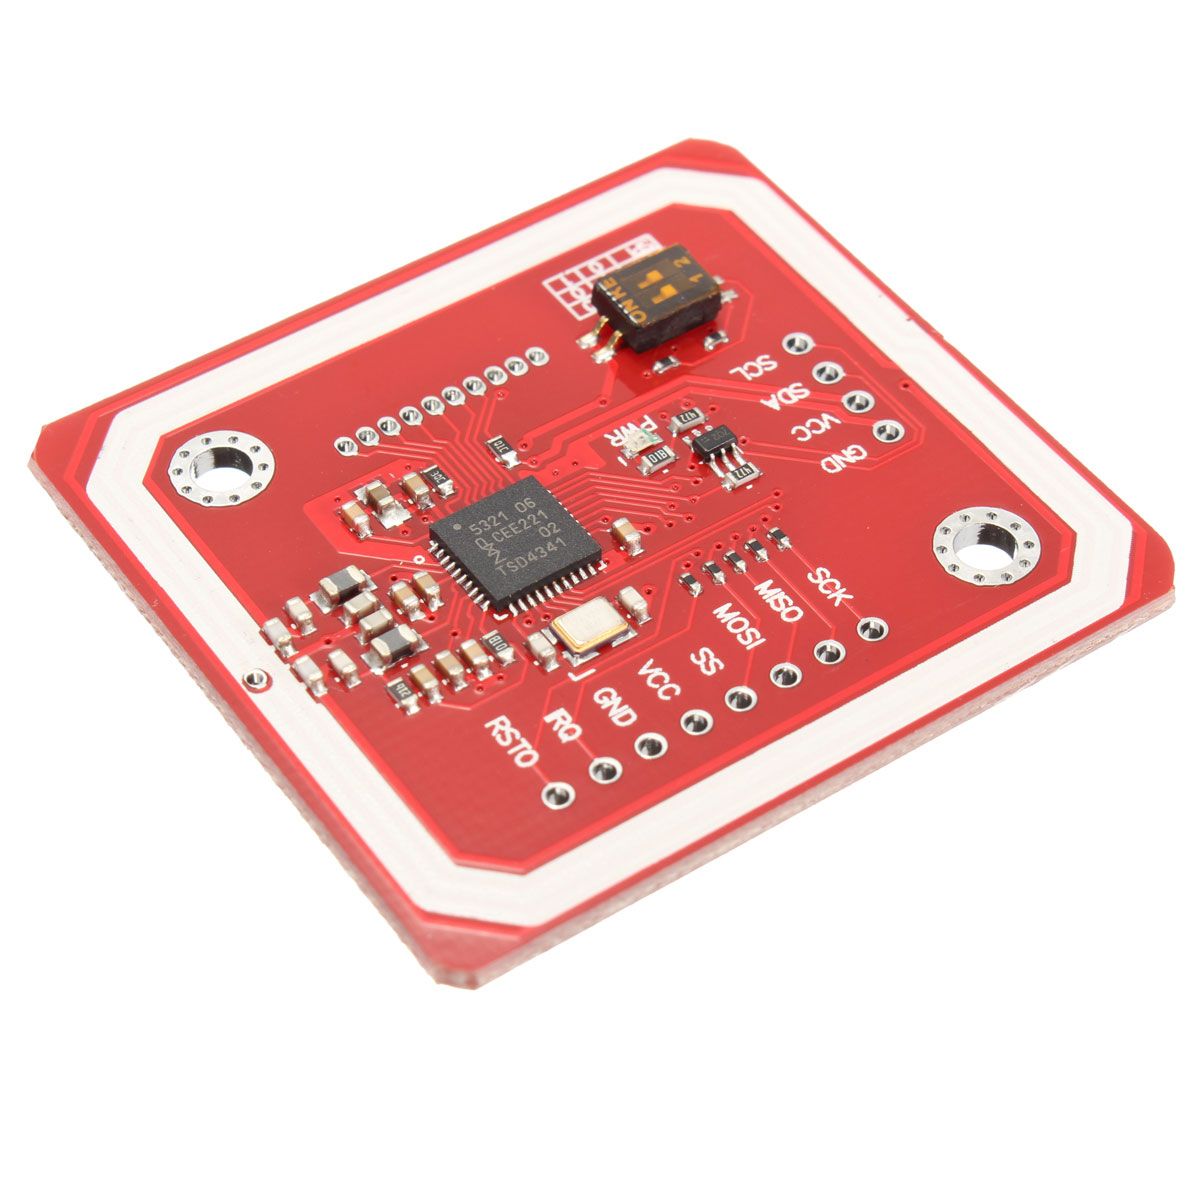 PN532-NFC-RFID-Module-V3-Reader-Writer-Breakout-Board-For-Android-1213484